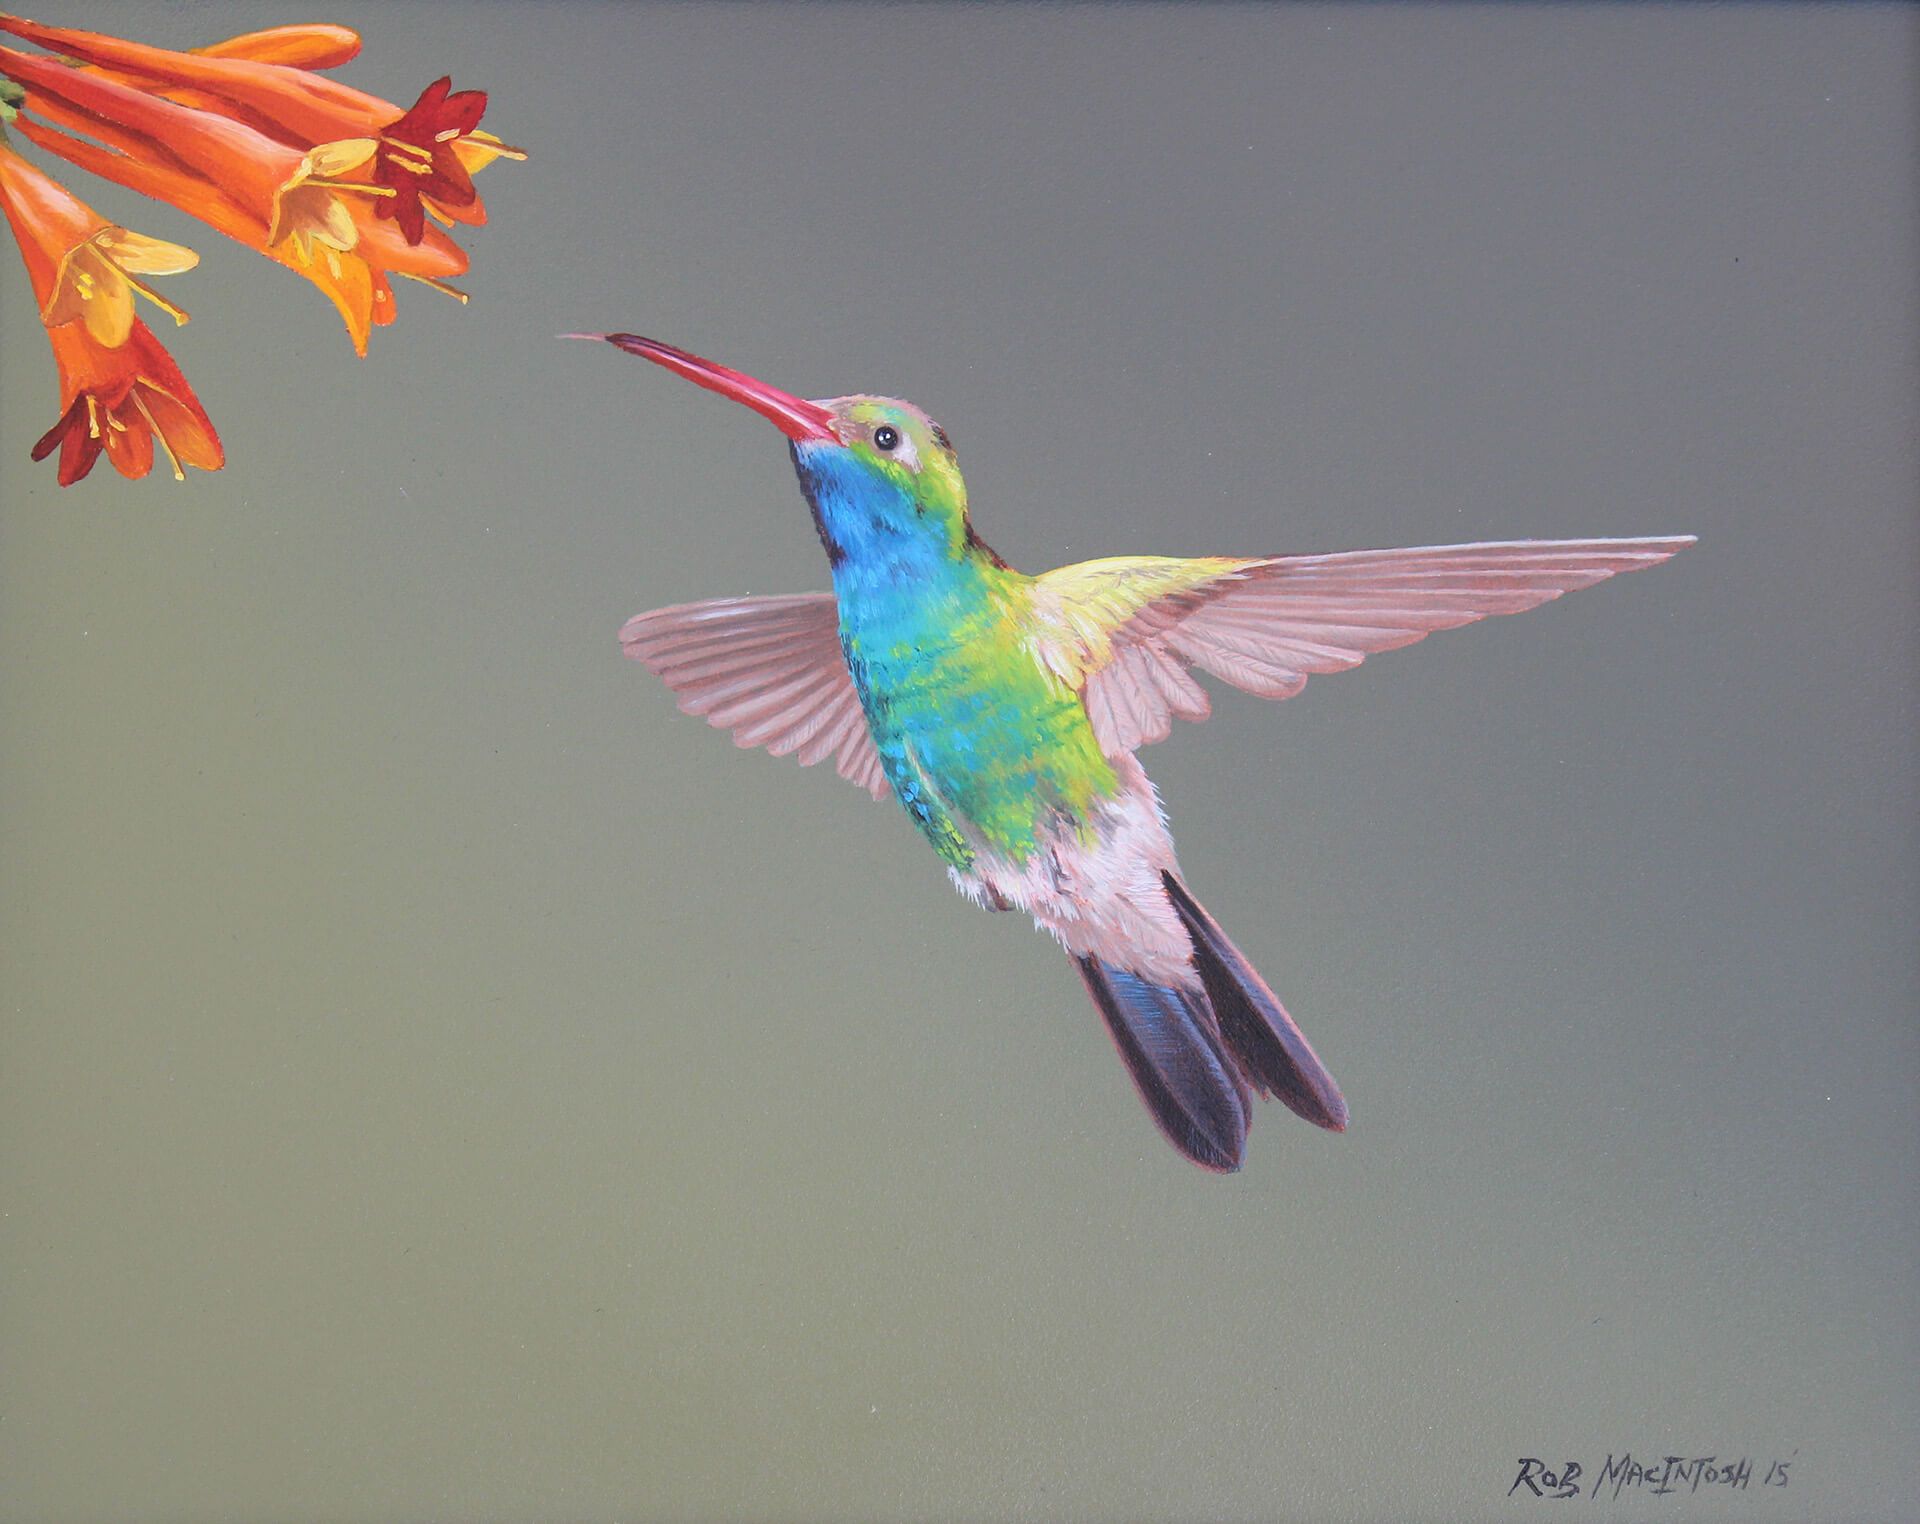 Photorealistic painting of a hummingbird approaching flower